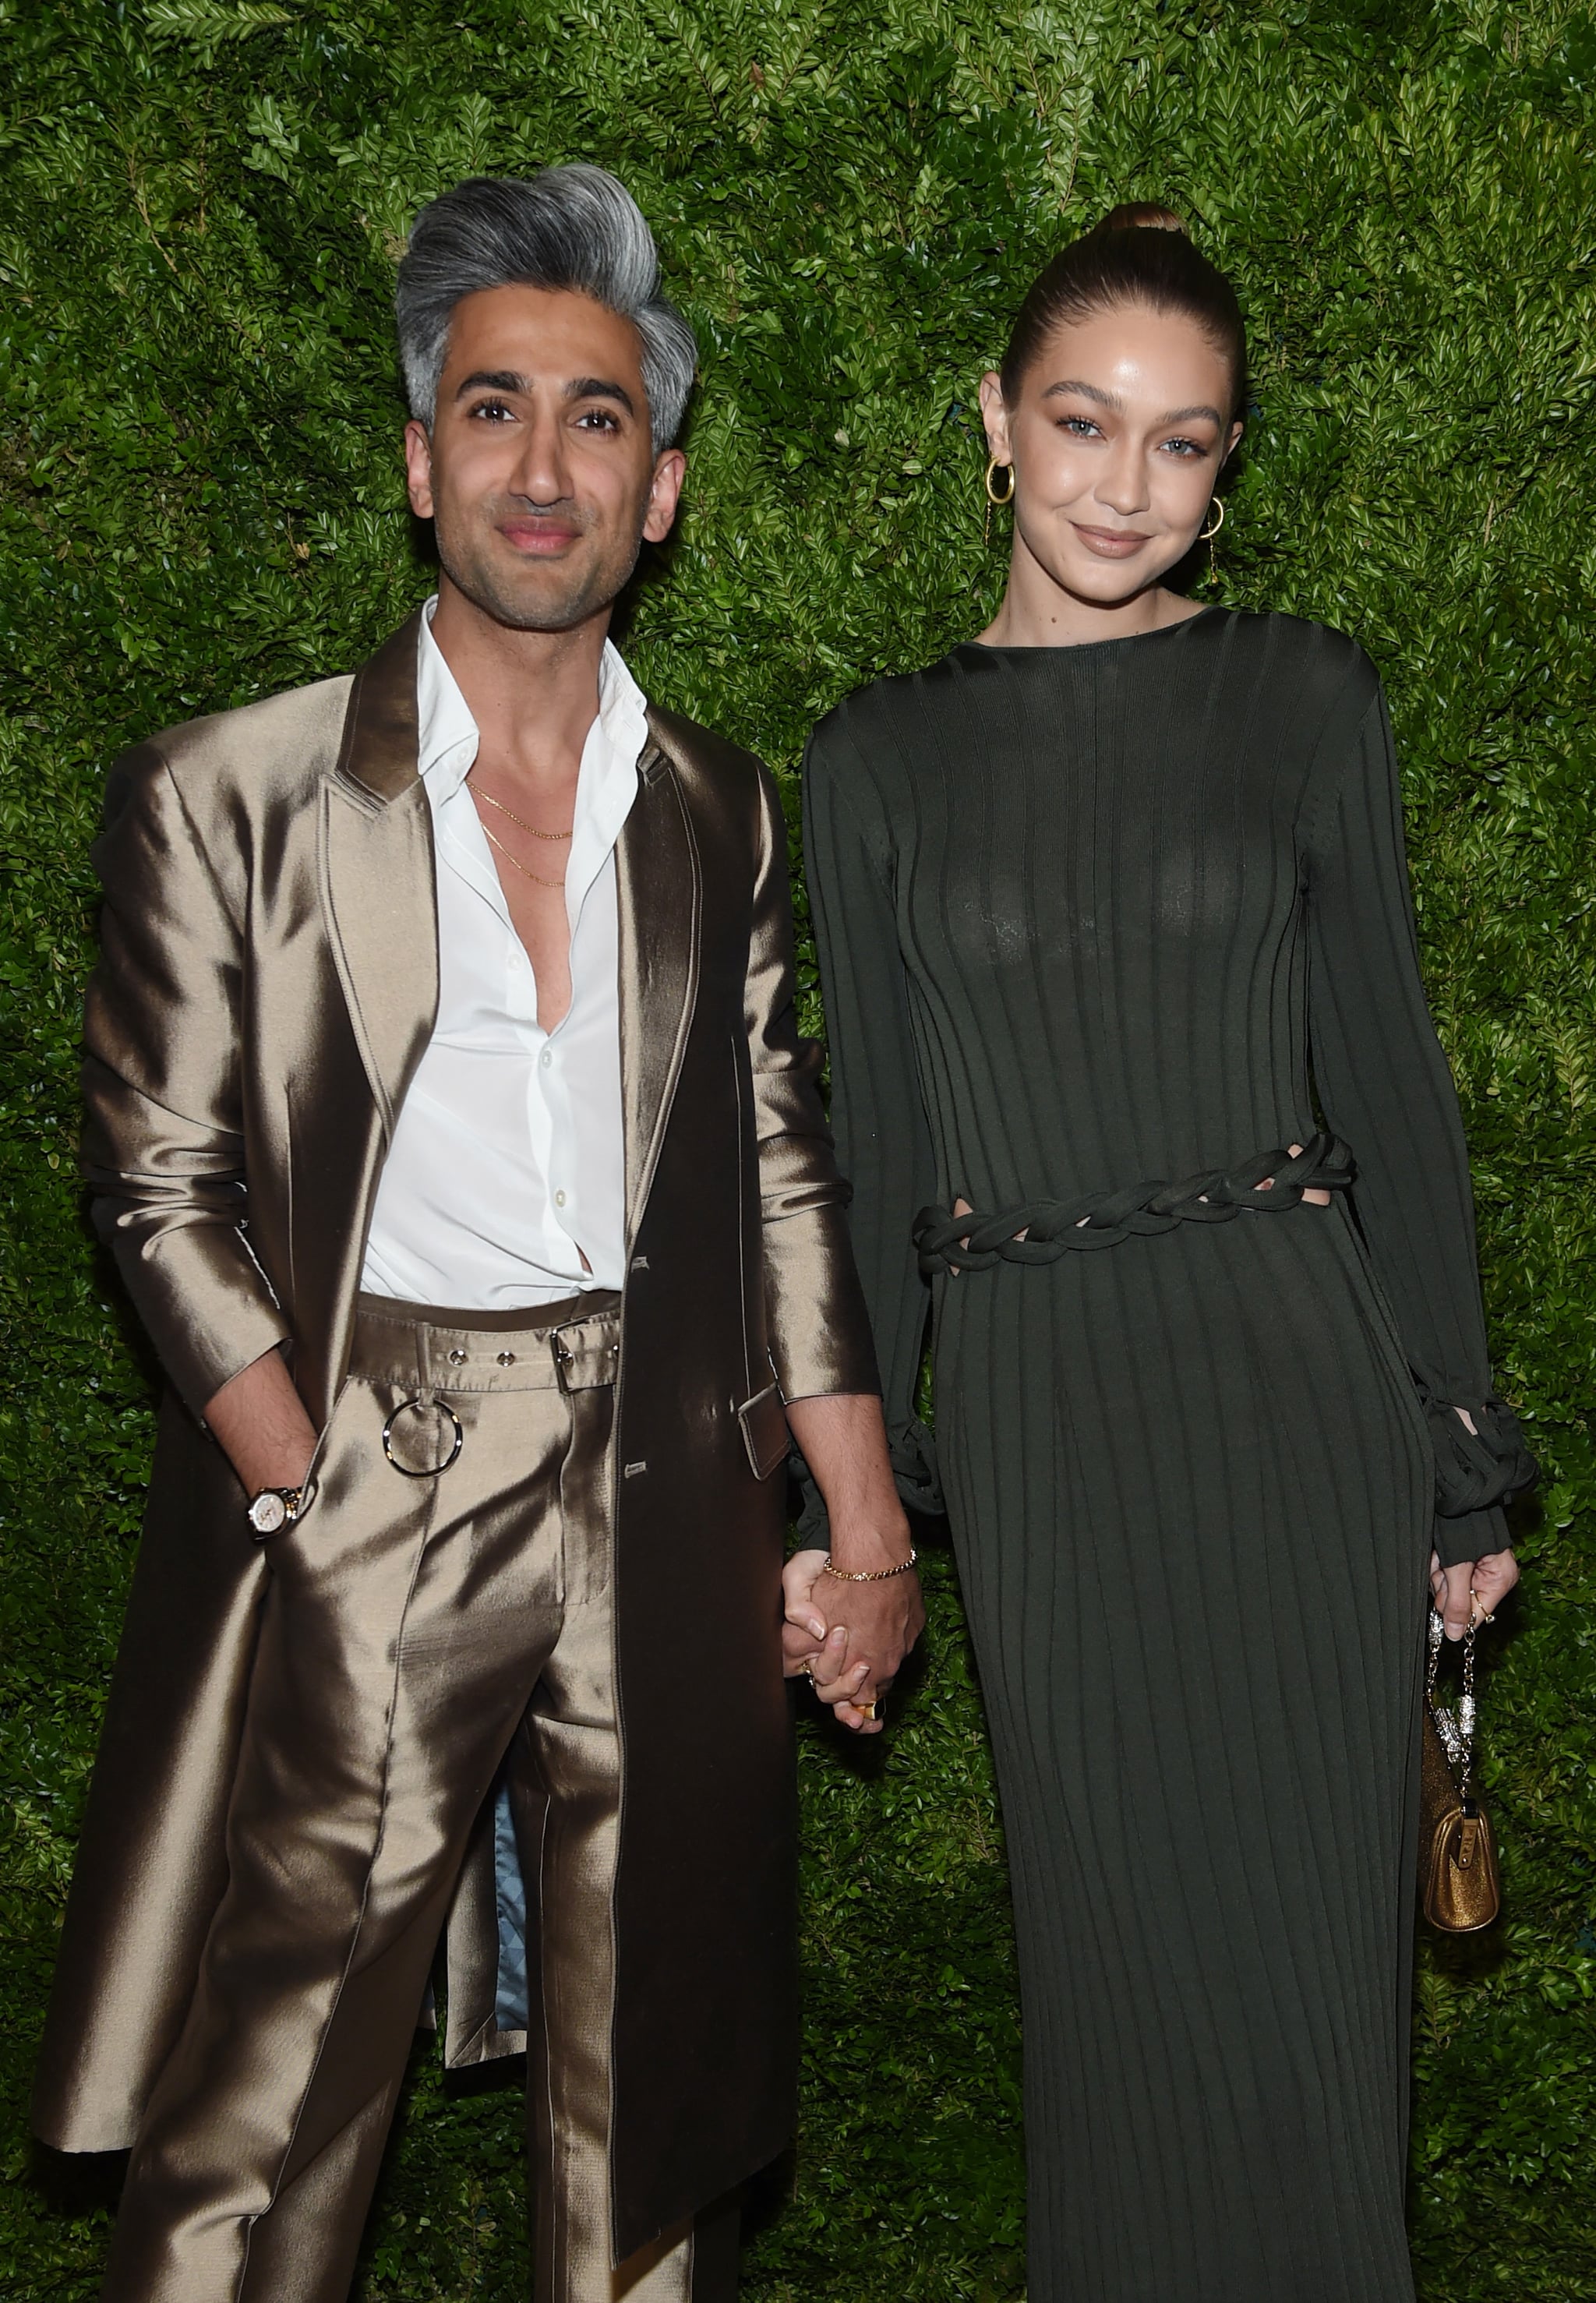 NEW YORK, NEW YORK - NOVEMBER 04: Tan France and Gigi Hadid attend the CFDA / Vogue Fashion Fund 2019 Awards at Cipriani South Street on November 04, 2019 in New York City. (Photo by Jamie McCarthy/Getty Images)